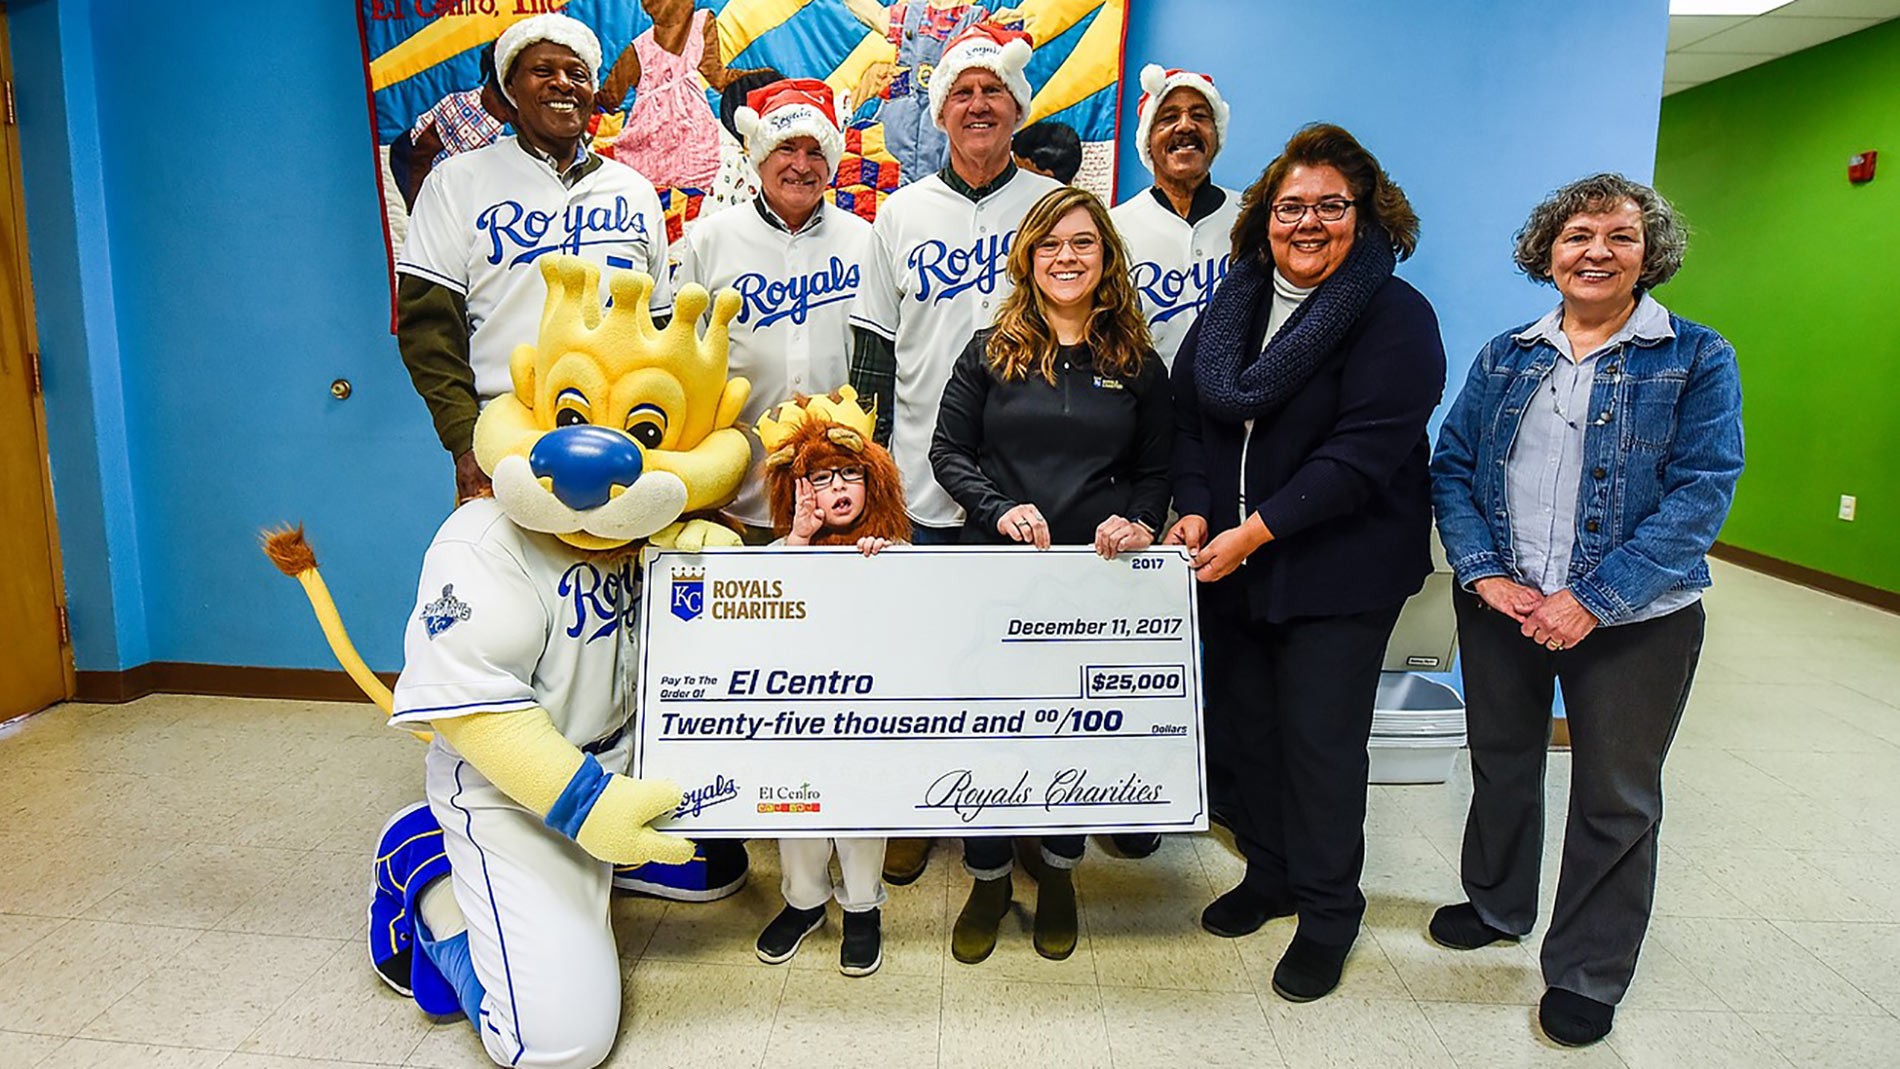 Image Courtesy of Royals Charities